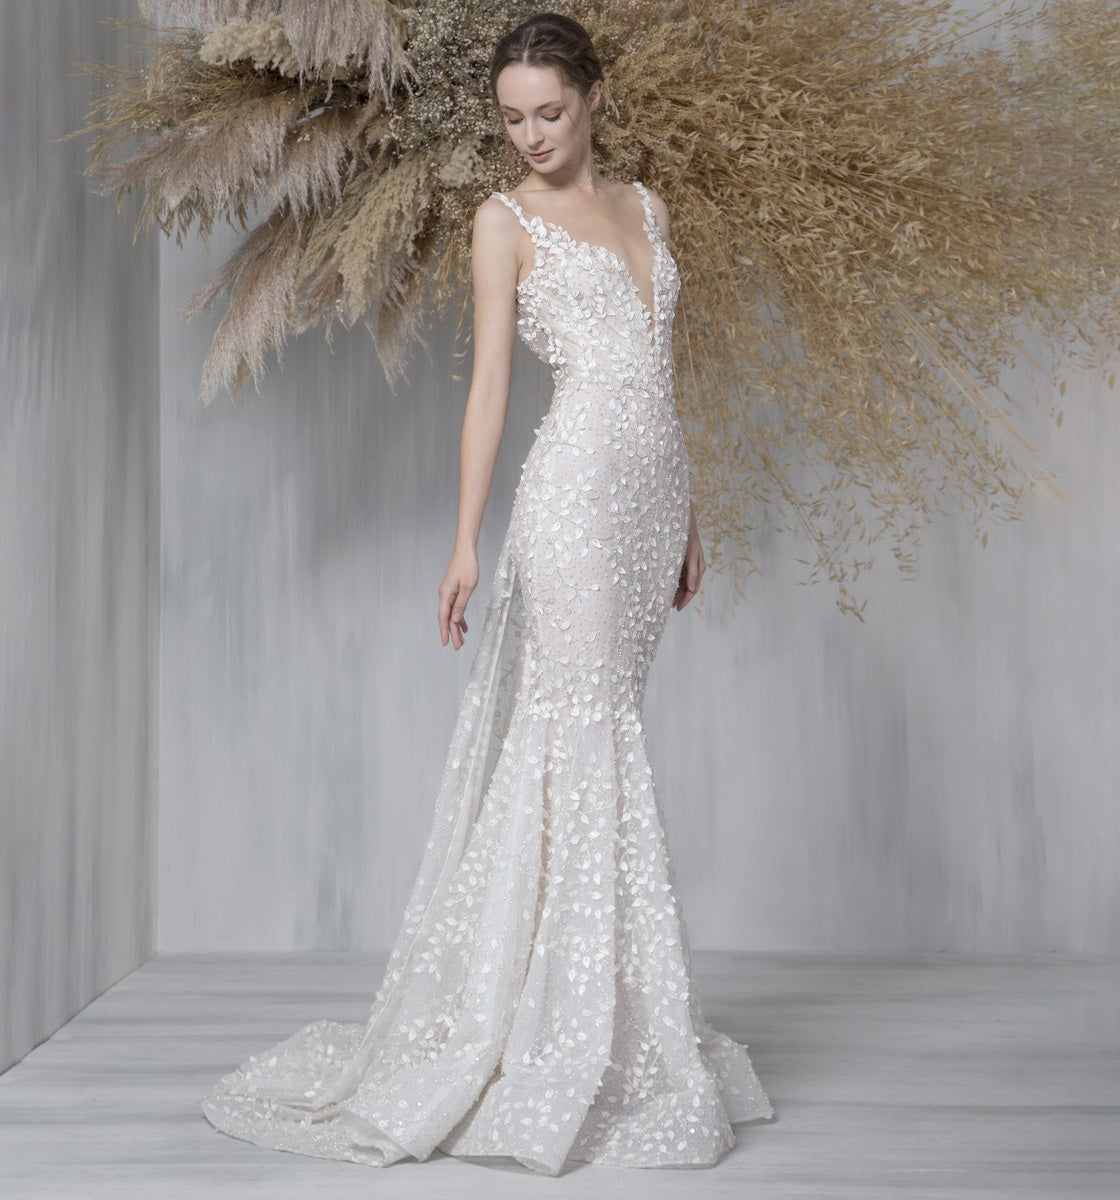 Kleinfeld Experience Coming to Brides by Lola Dré - Palm Beach Illustrated